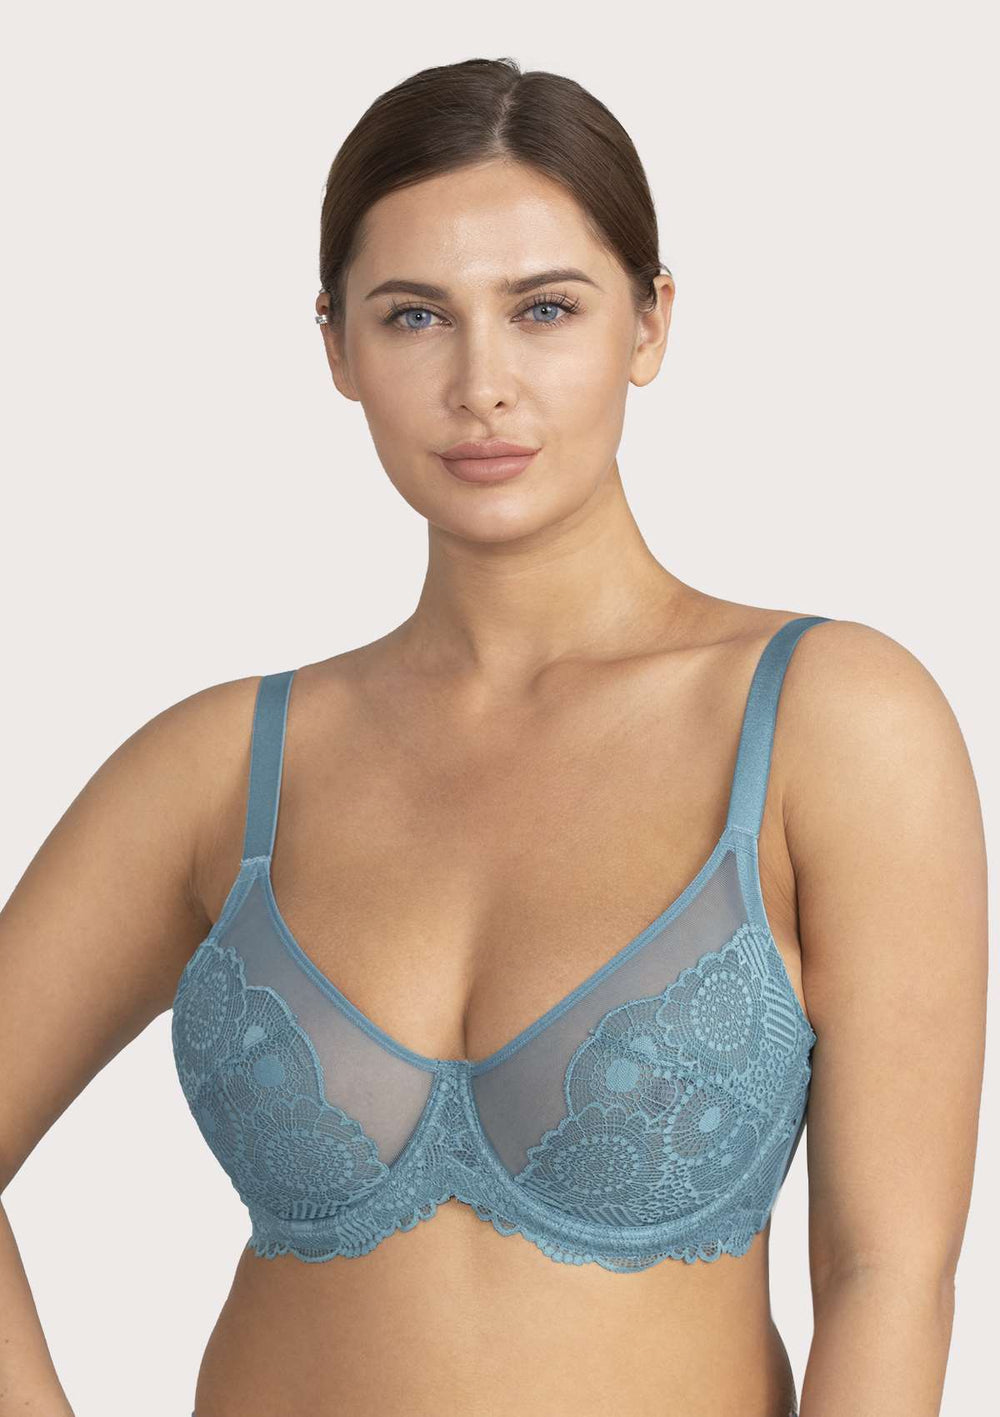 Women's Lace See-Through Bra,Sexy Floral Mesh Unlined No Padded